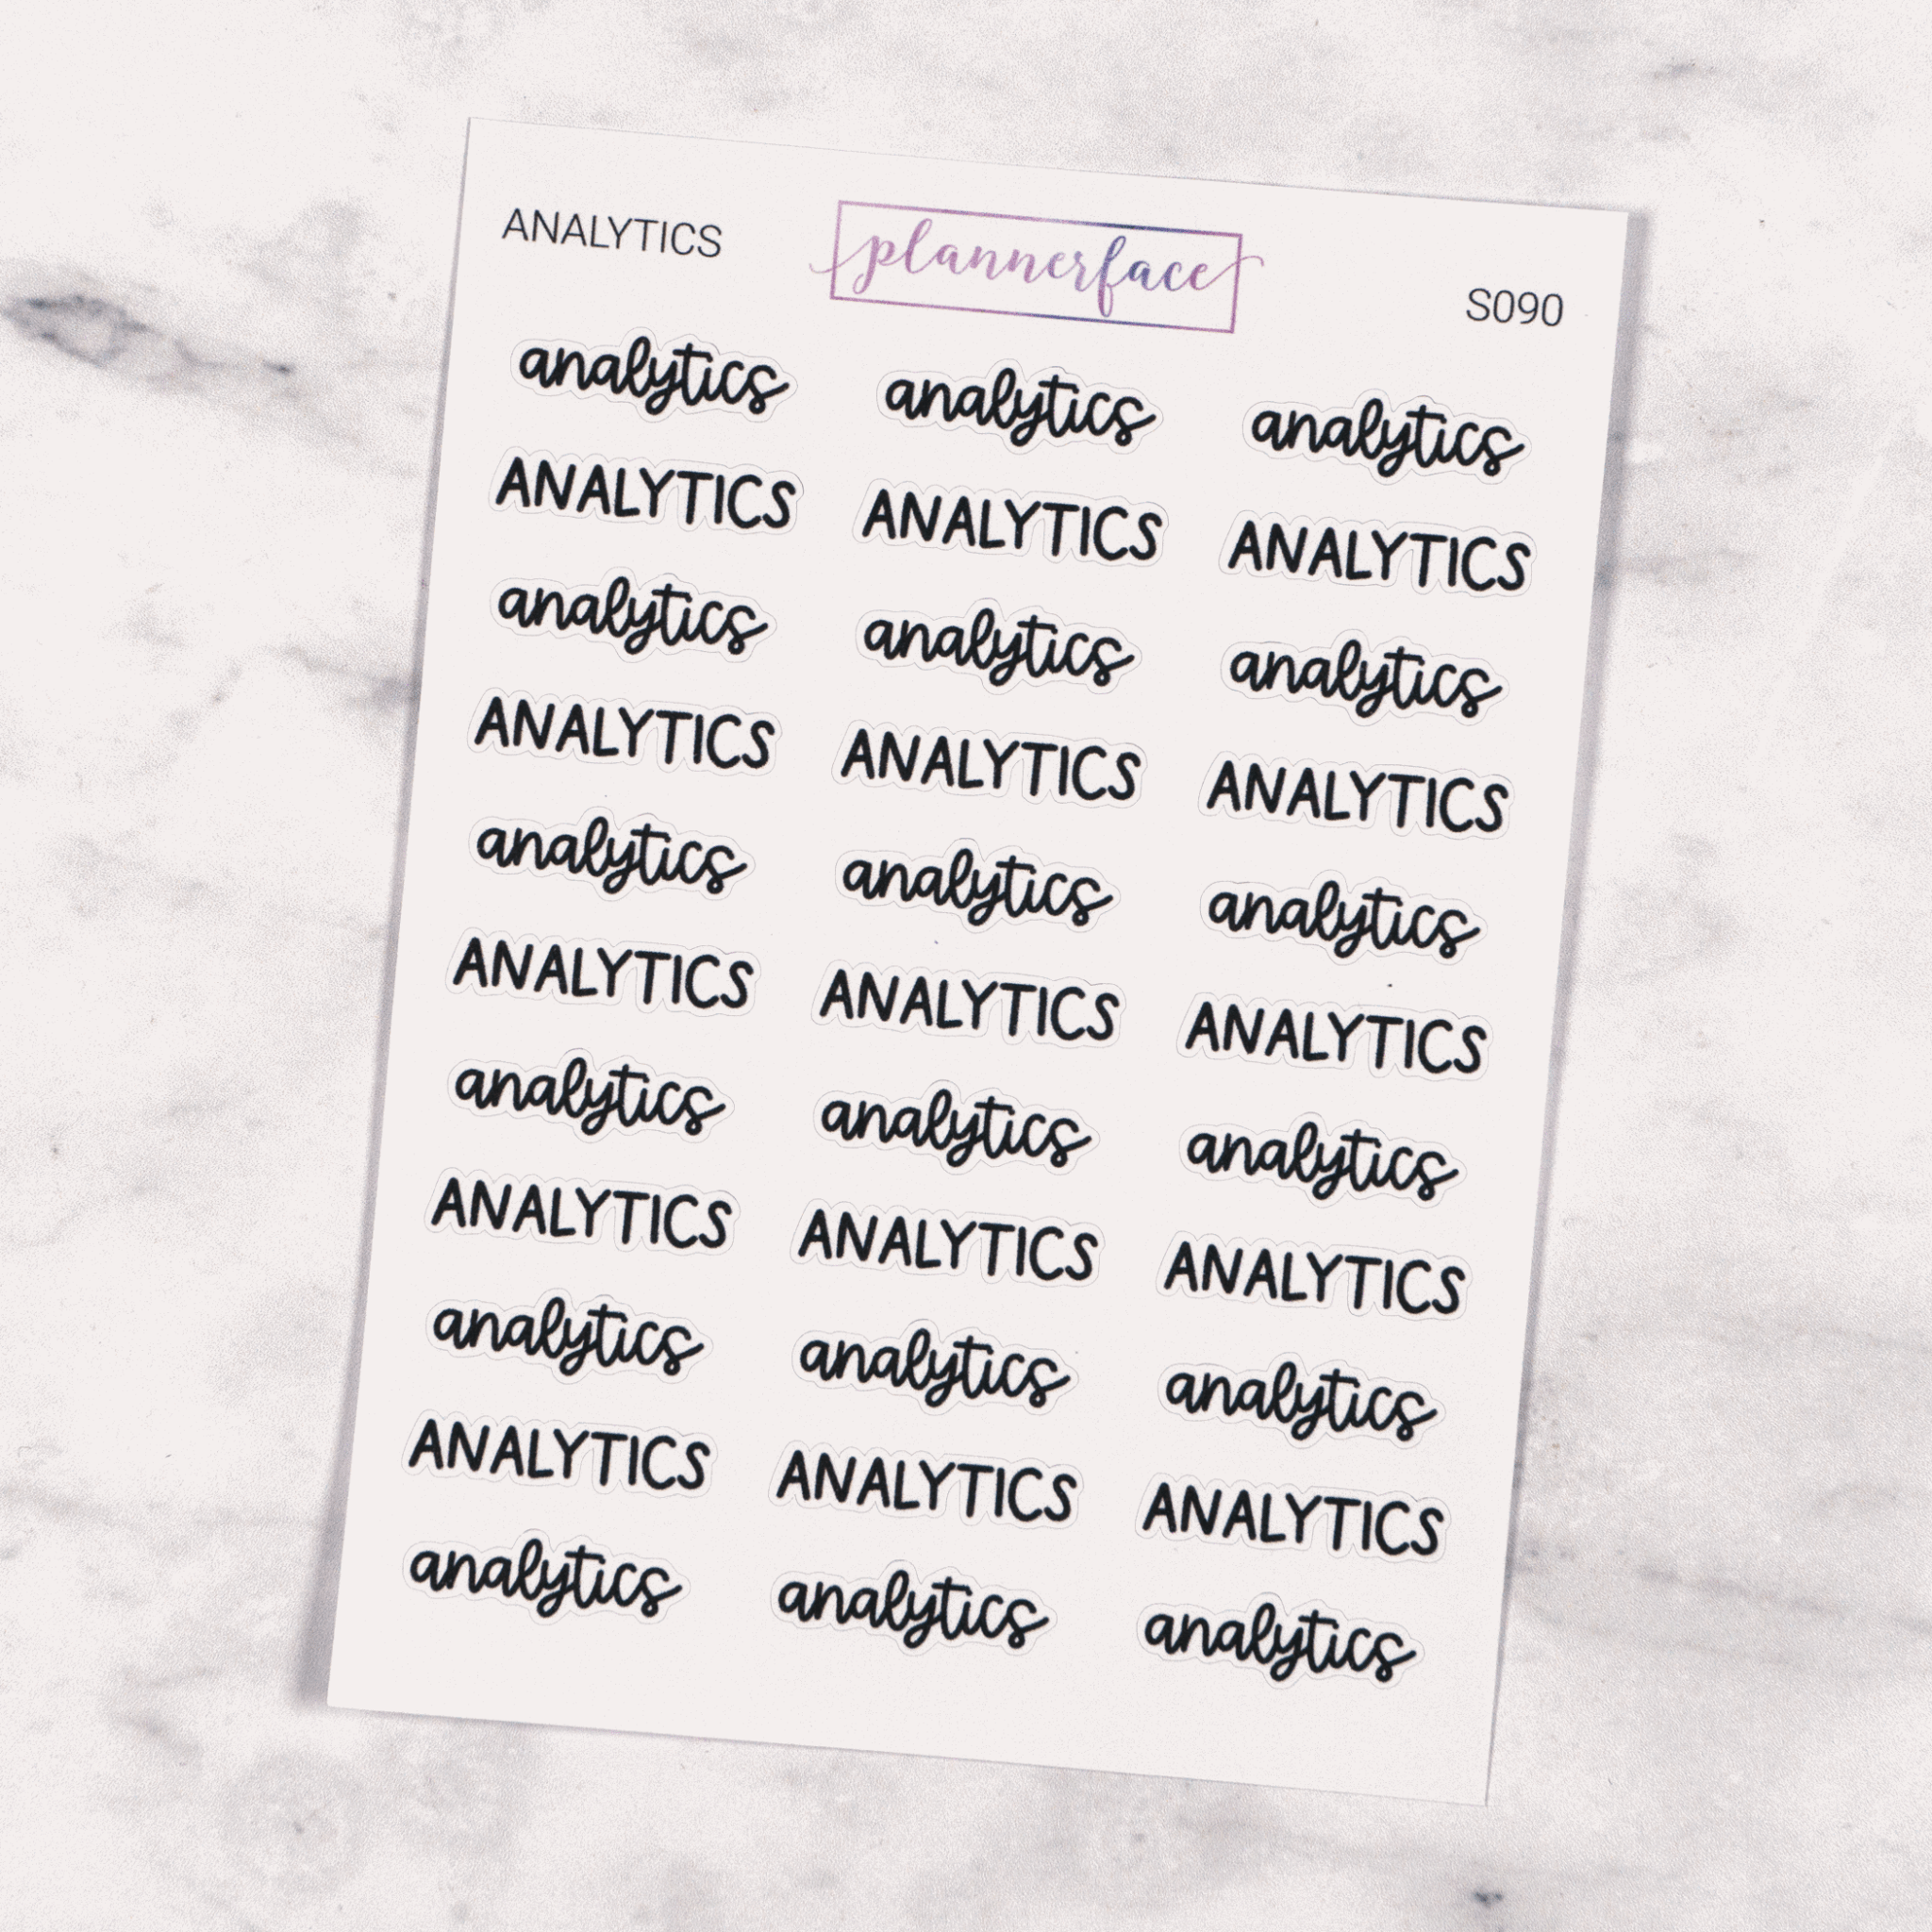 Analytics | Scripts by Plannerface